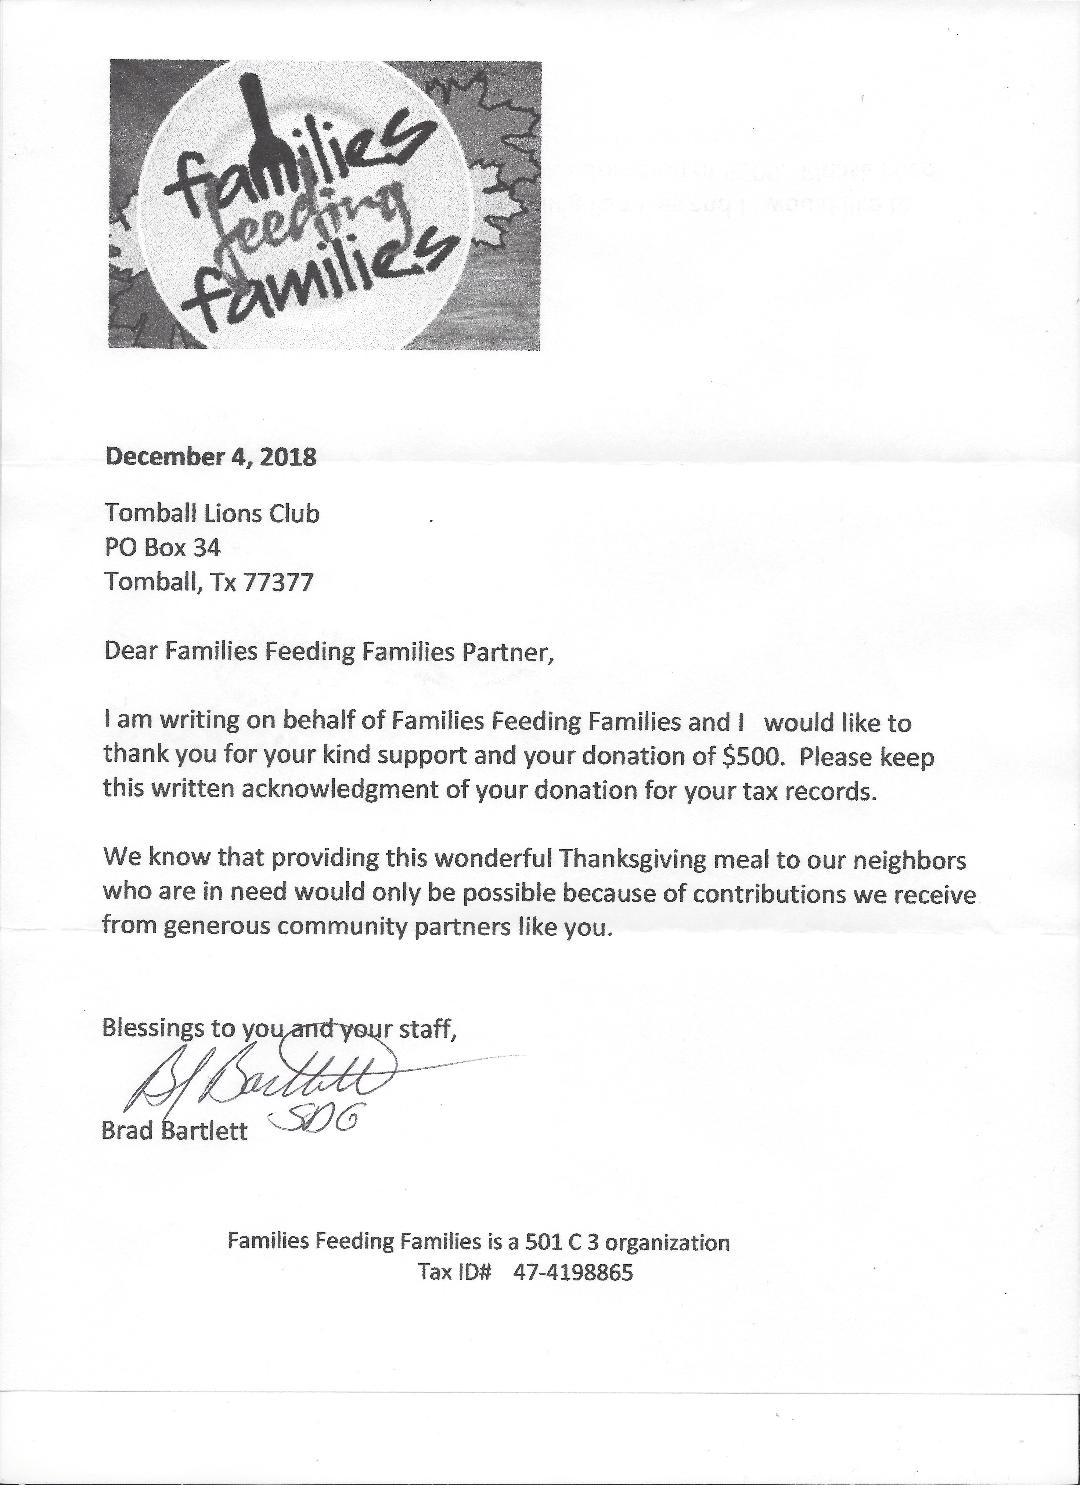 thanksgiving-donation-letter-samples-hq-printable-documents